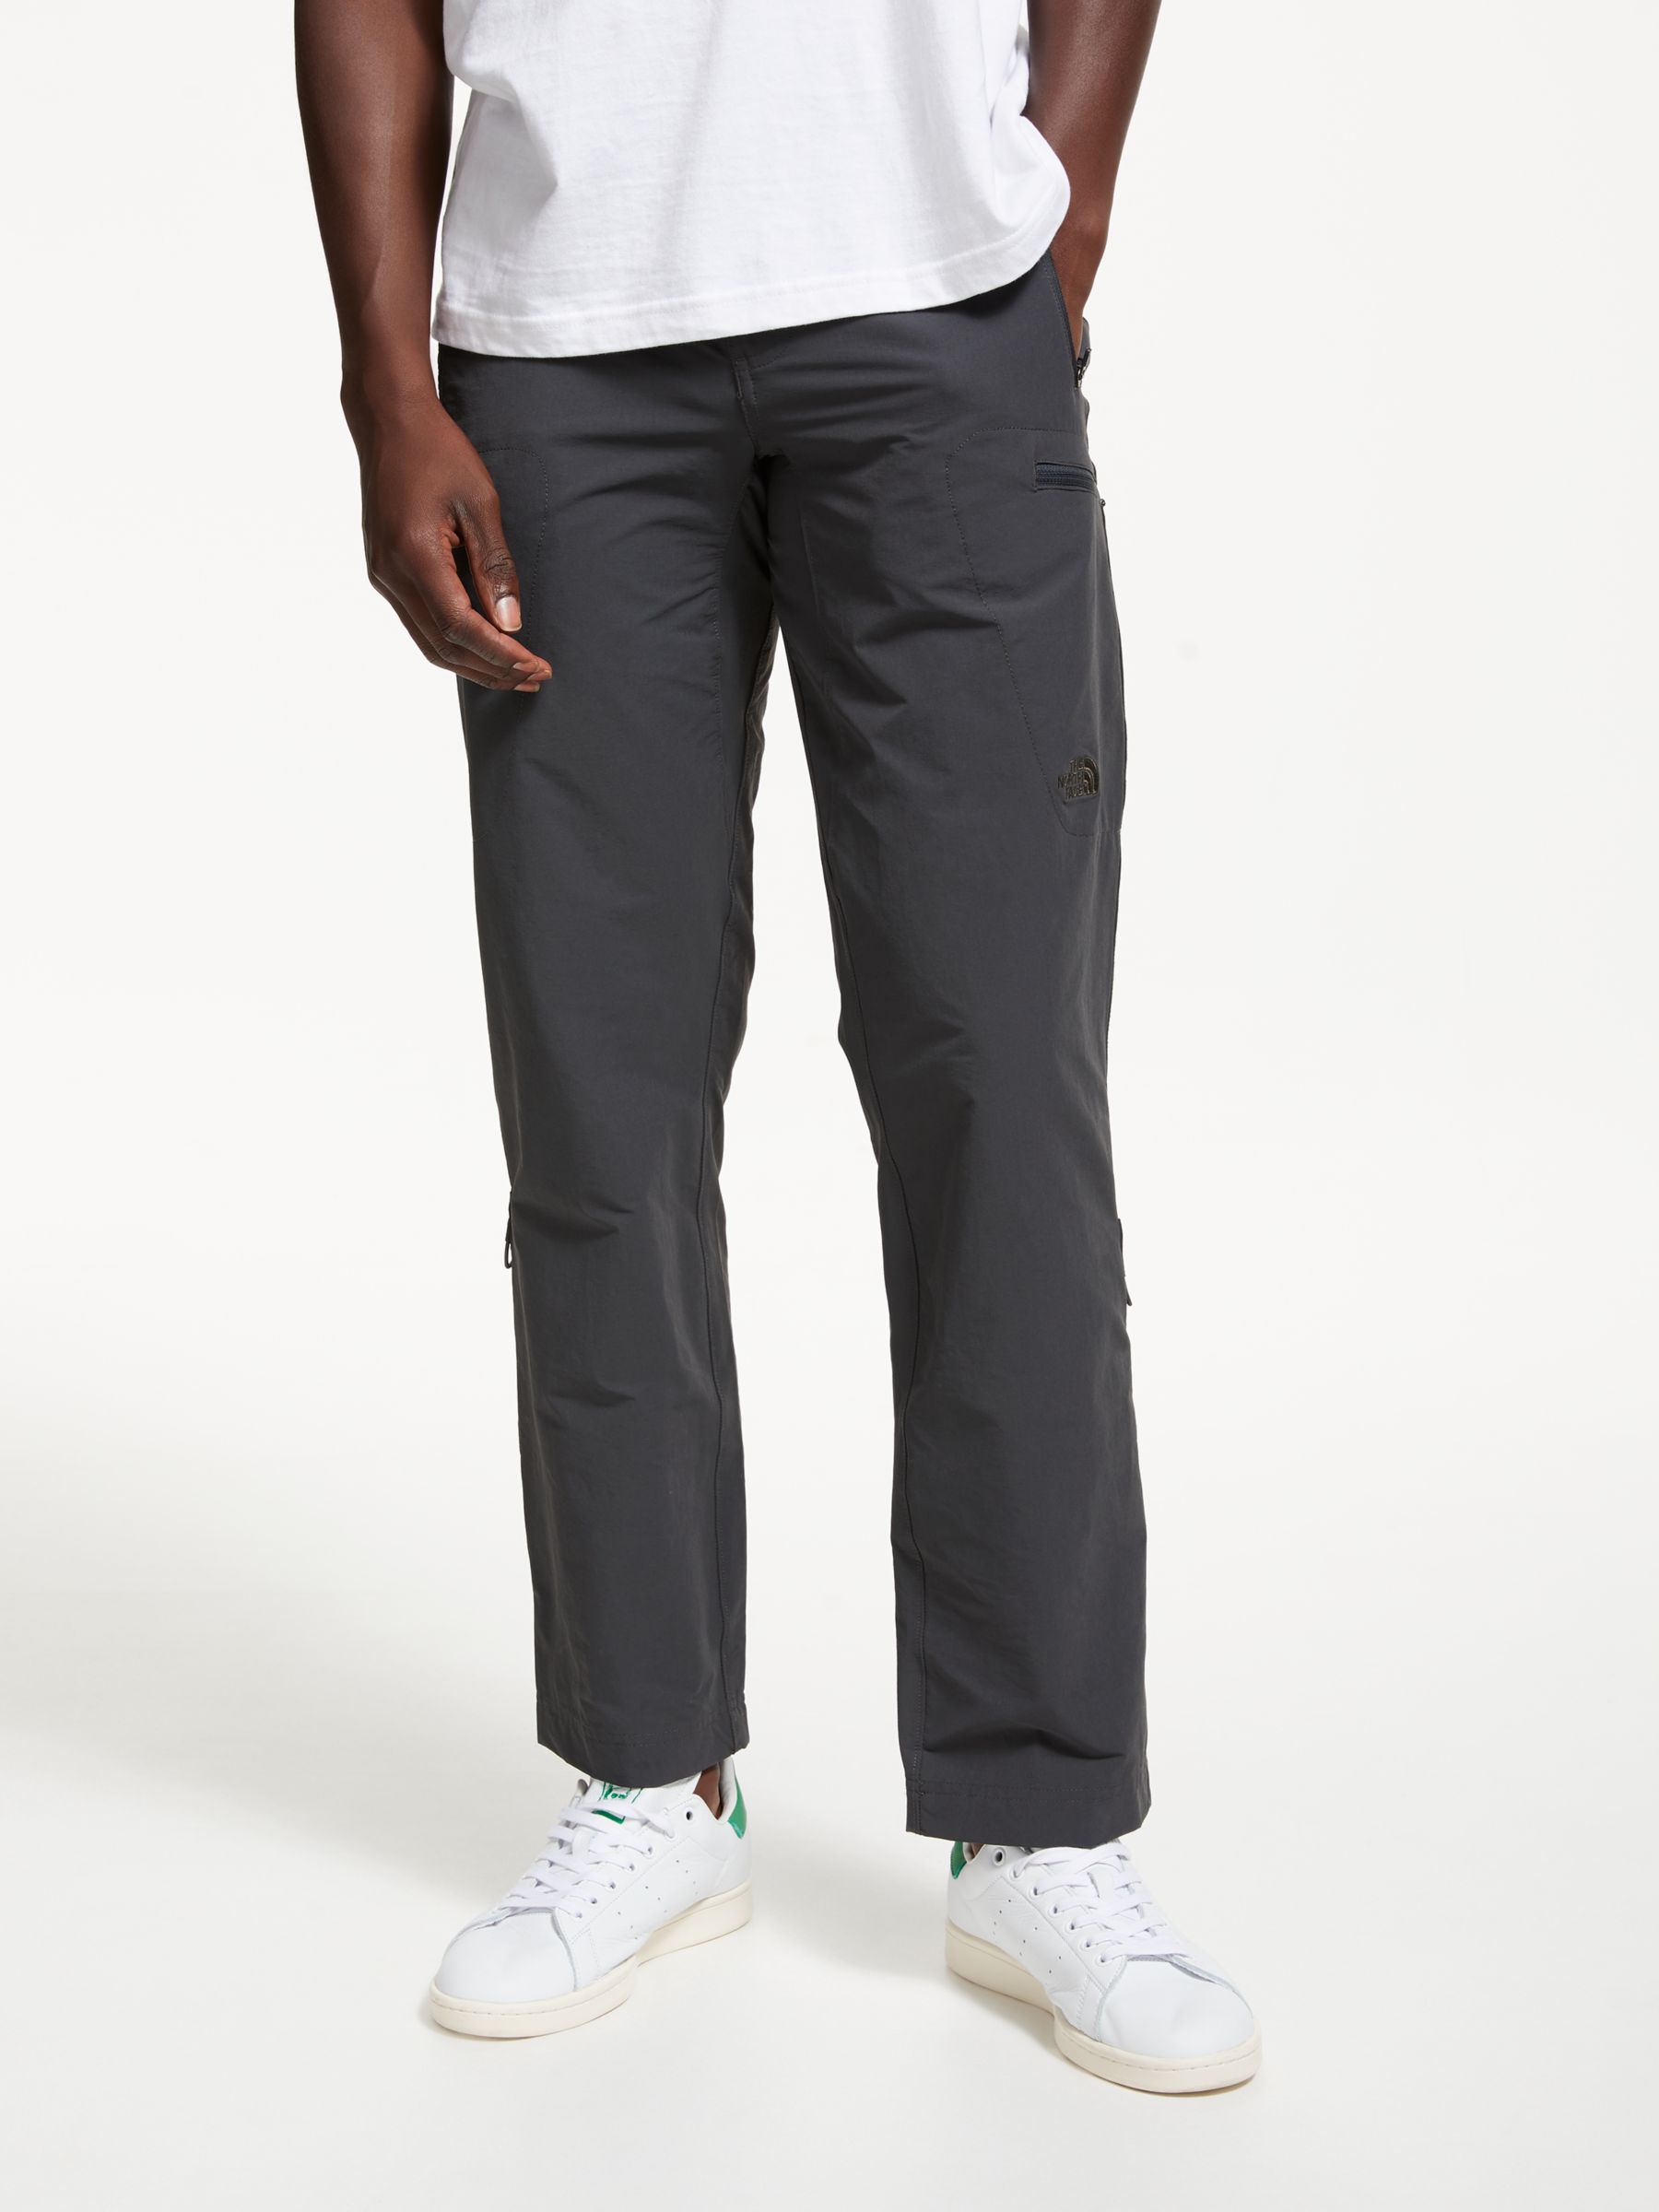 north face exploration trousers